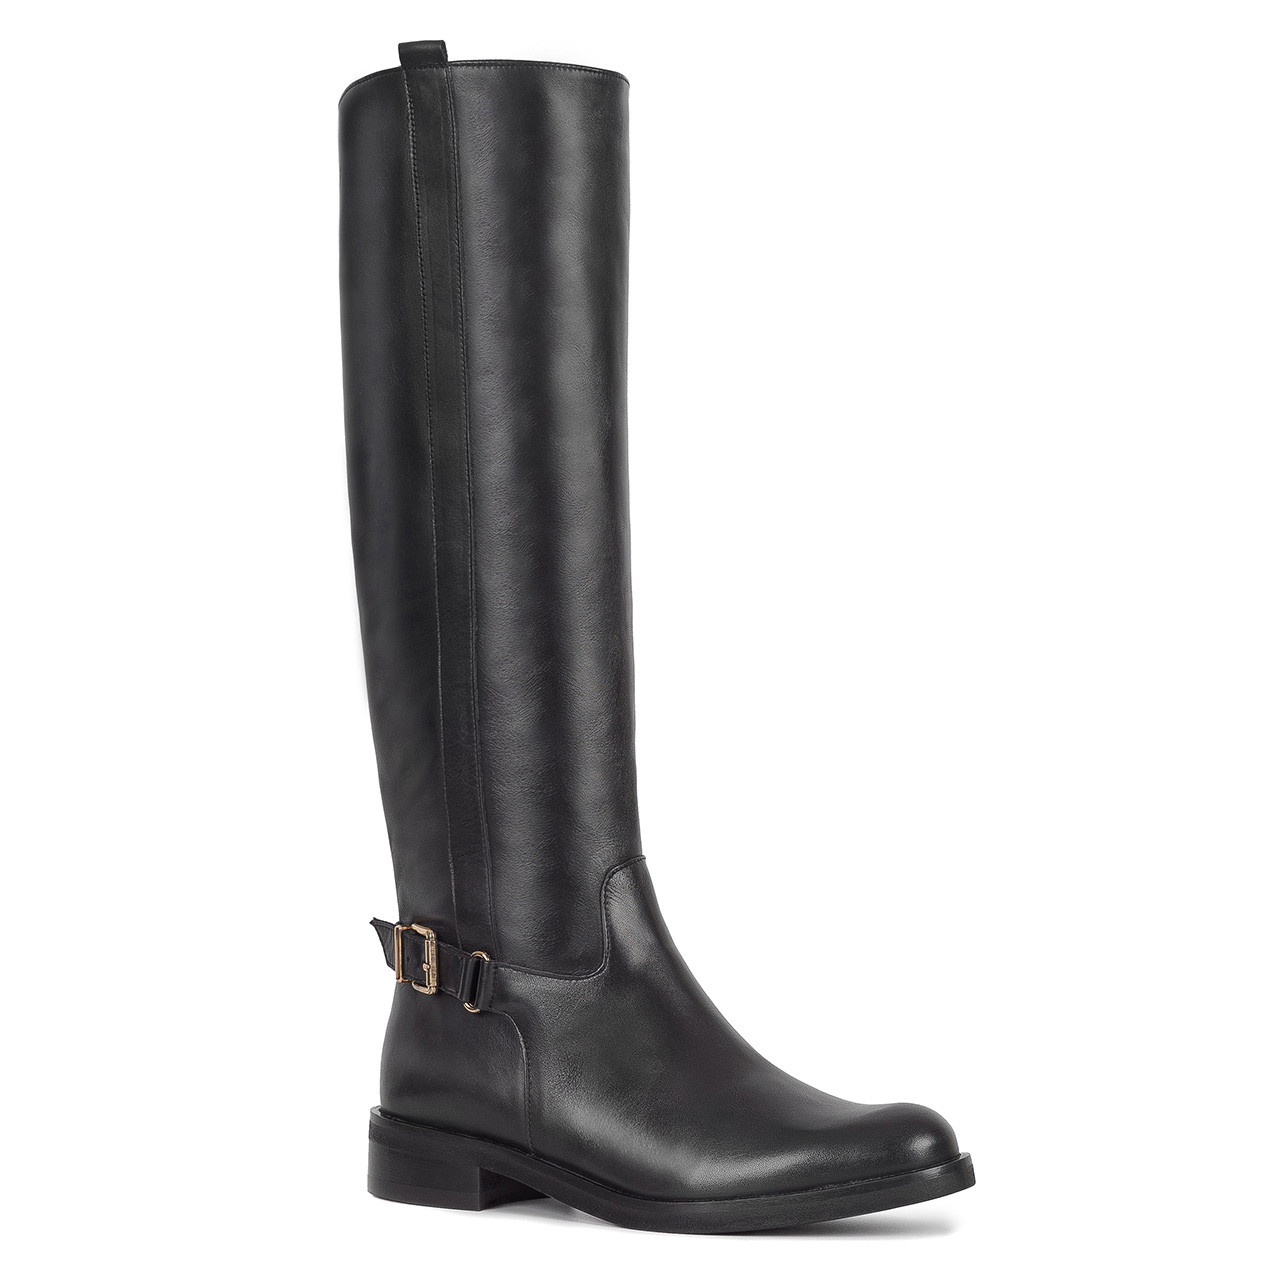 Comfortable black leather women's top boots with a flat heels, made of natural grain premium leather